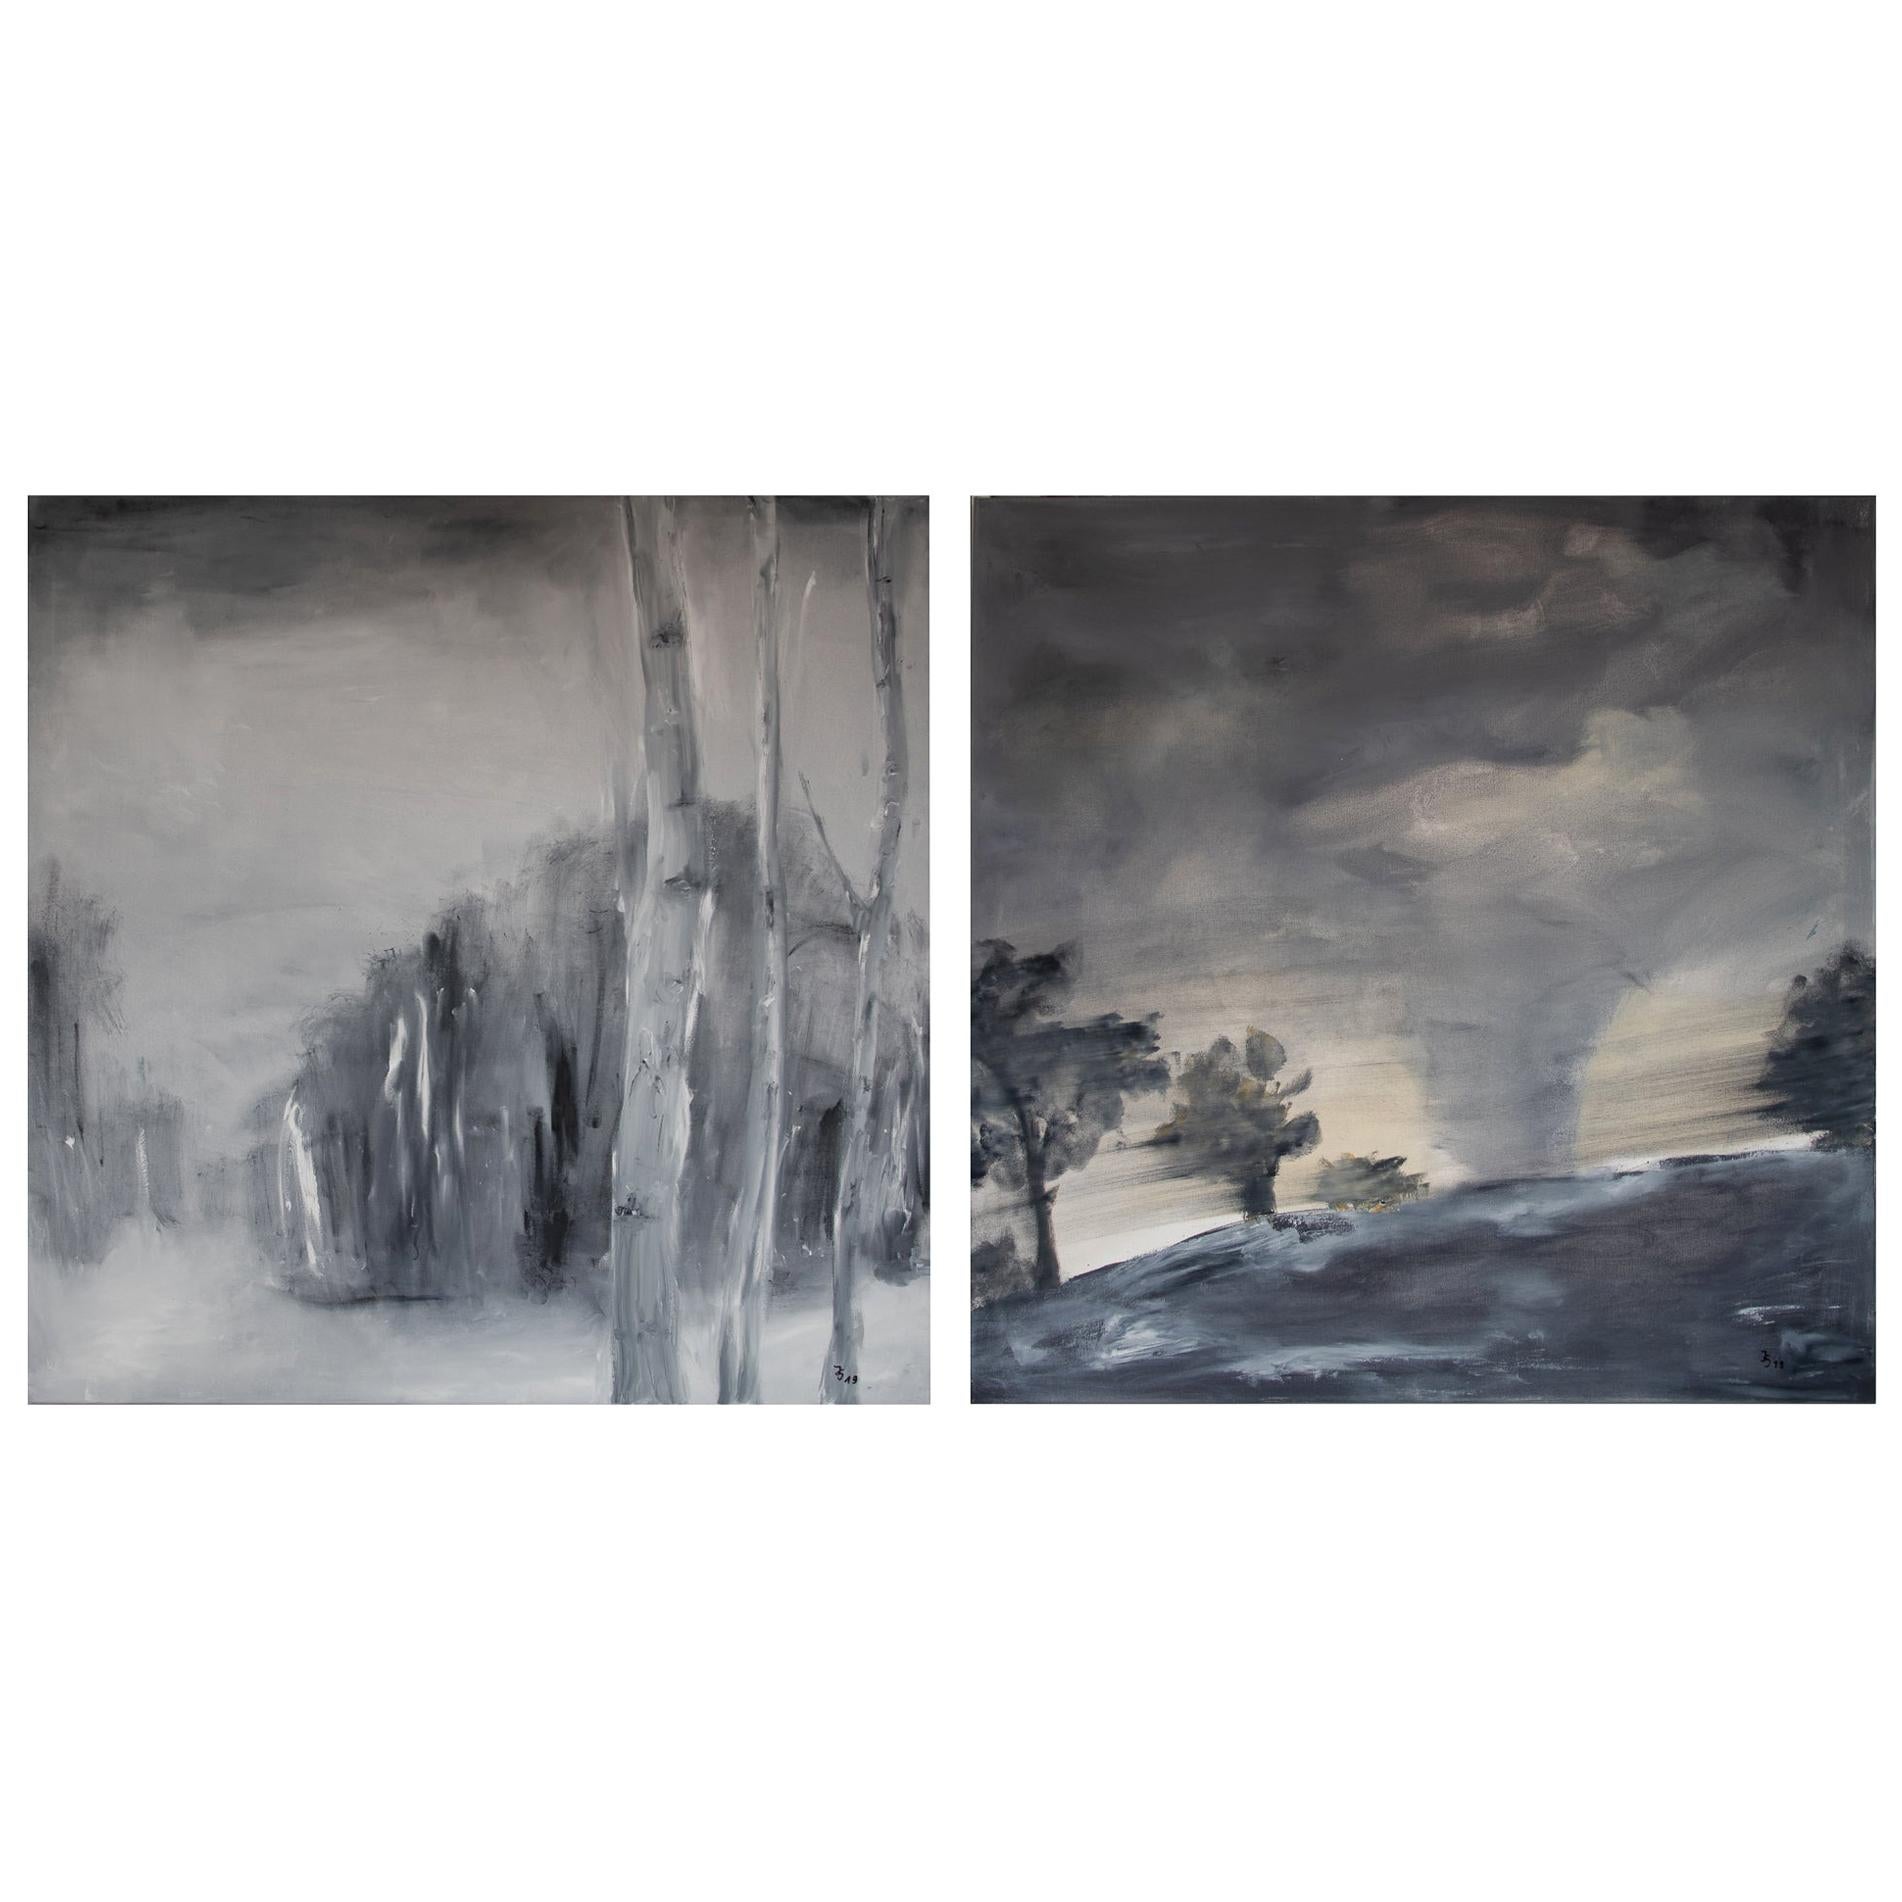 Set of Two Paintings by Ingrid Stolzenberg 'Landscape' German Post Expressionism